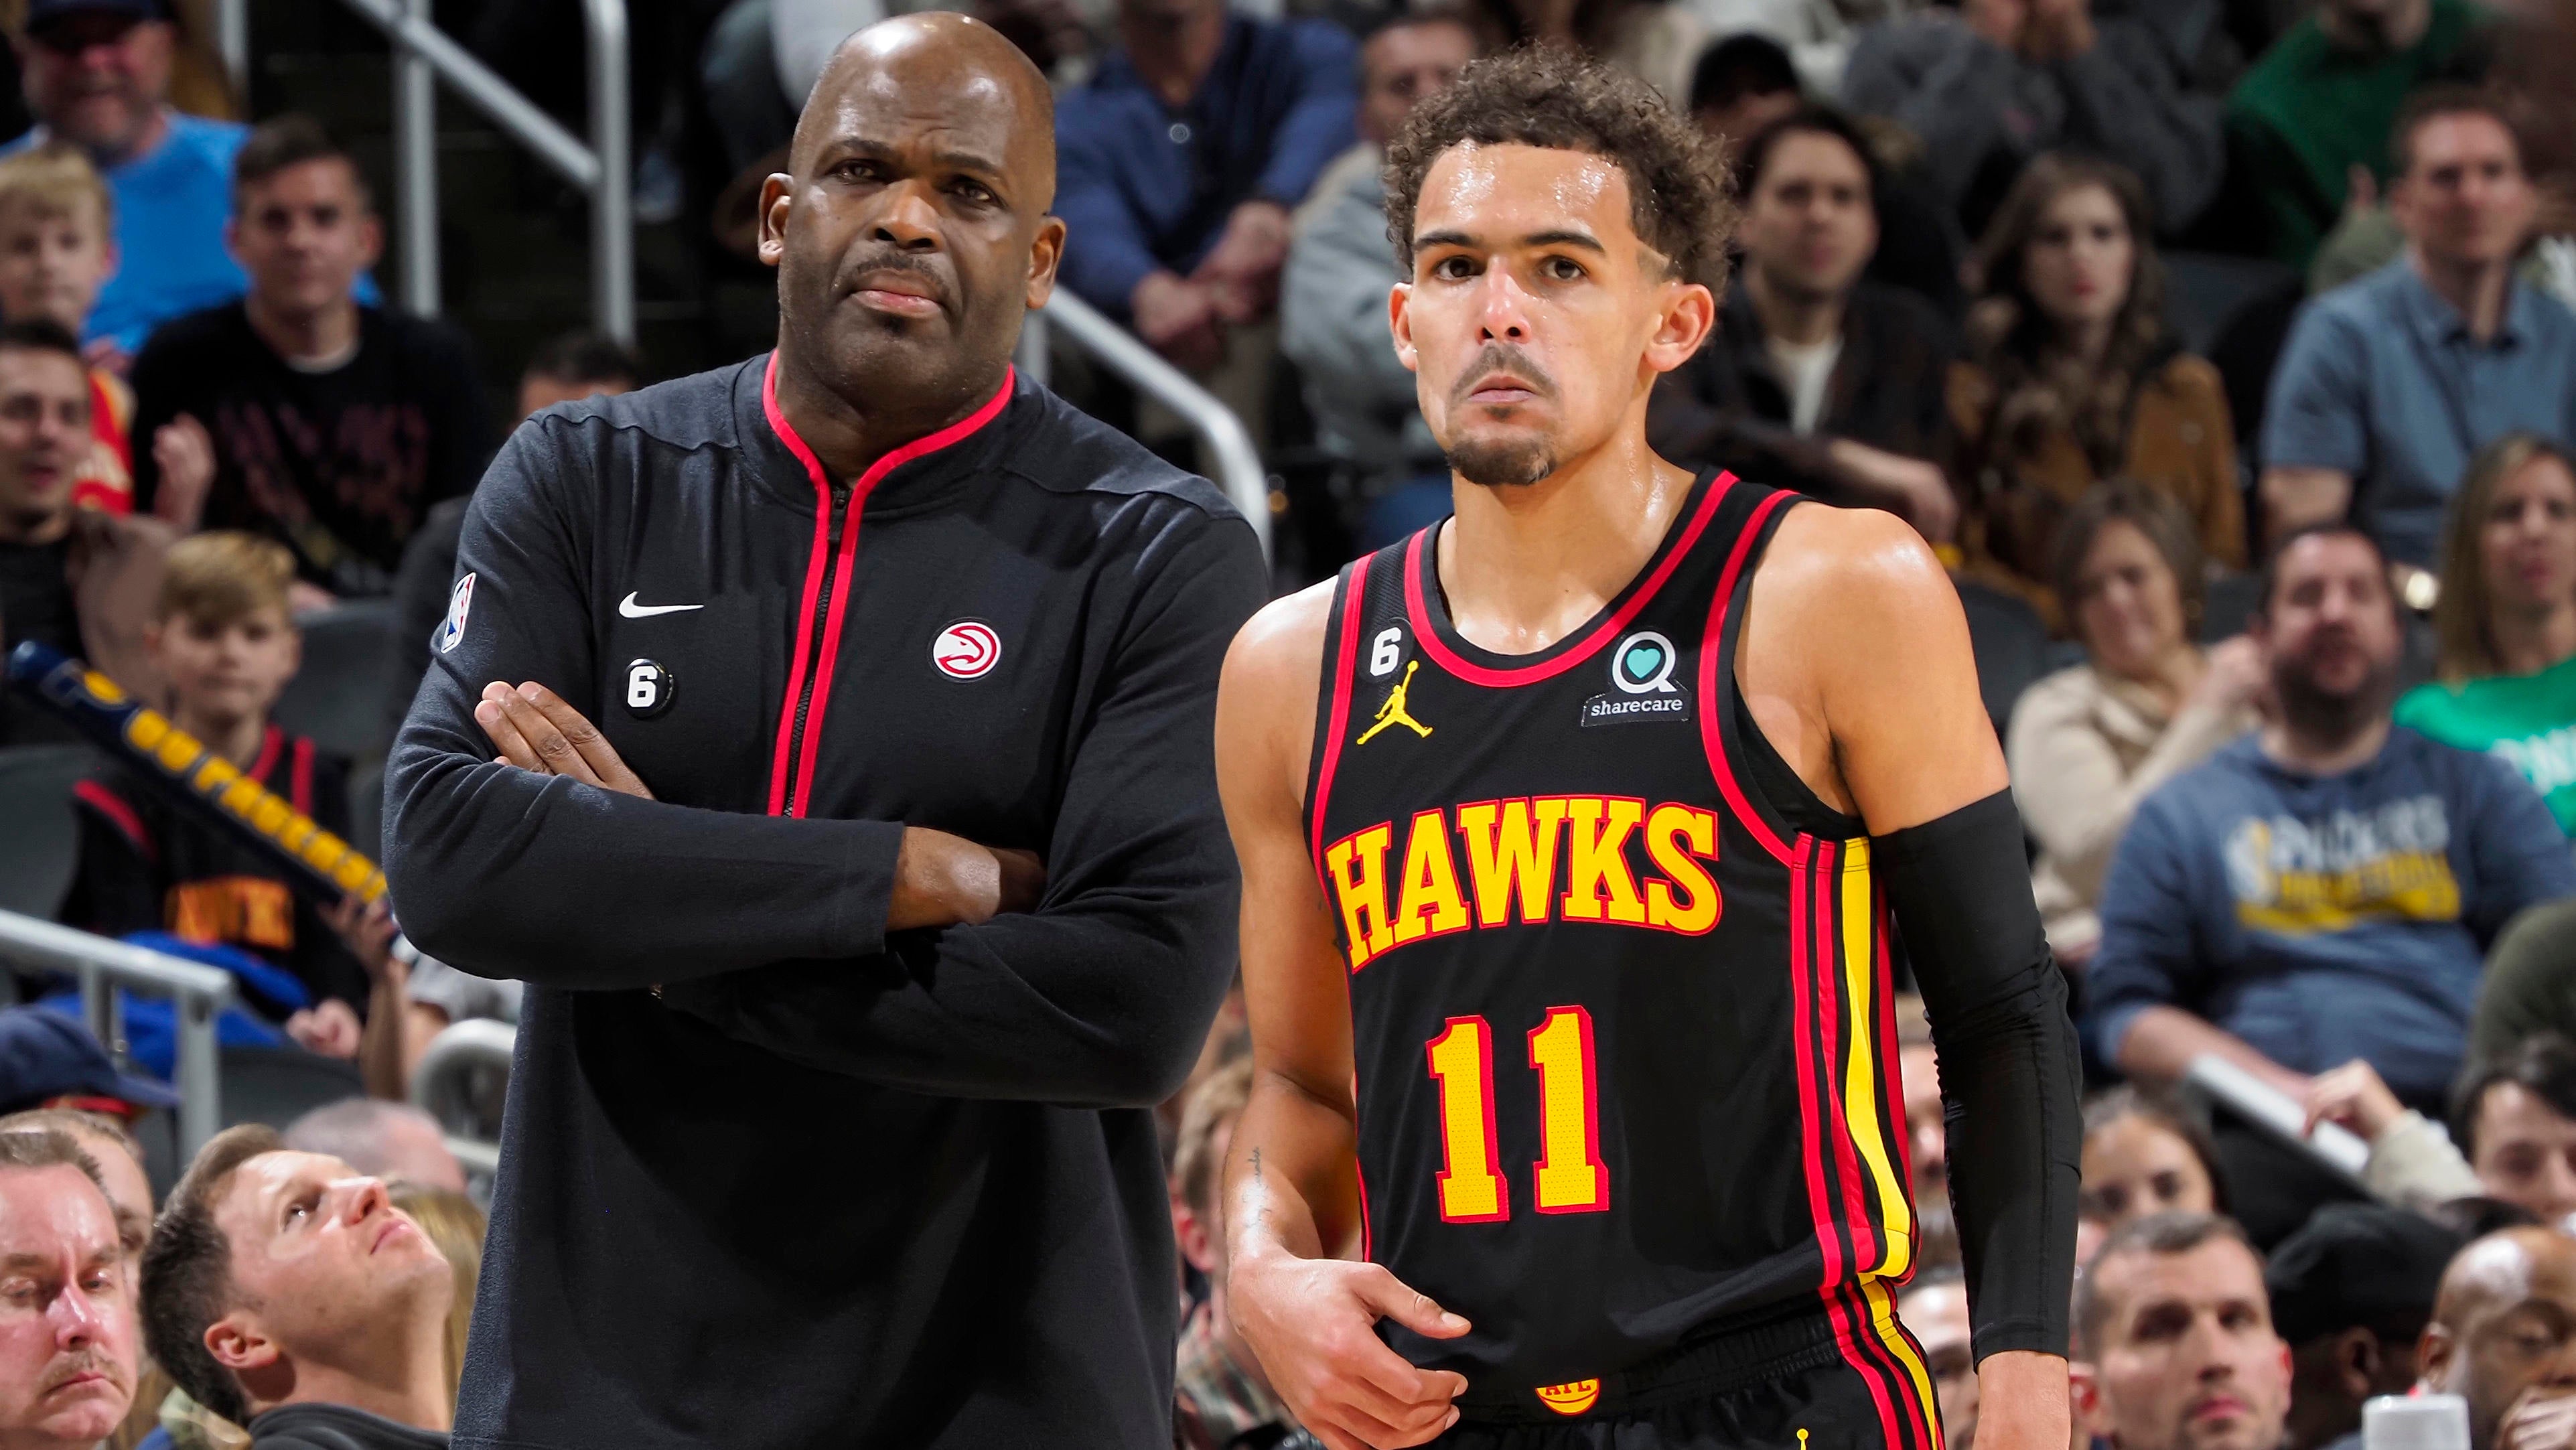 Trae Young needs to change his game after Nate McMillan’s firing, or he could be next in Atlanta

End-shutdown